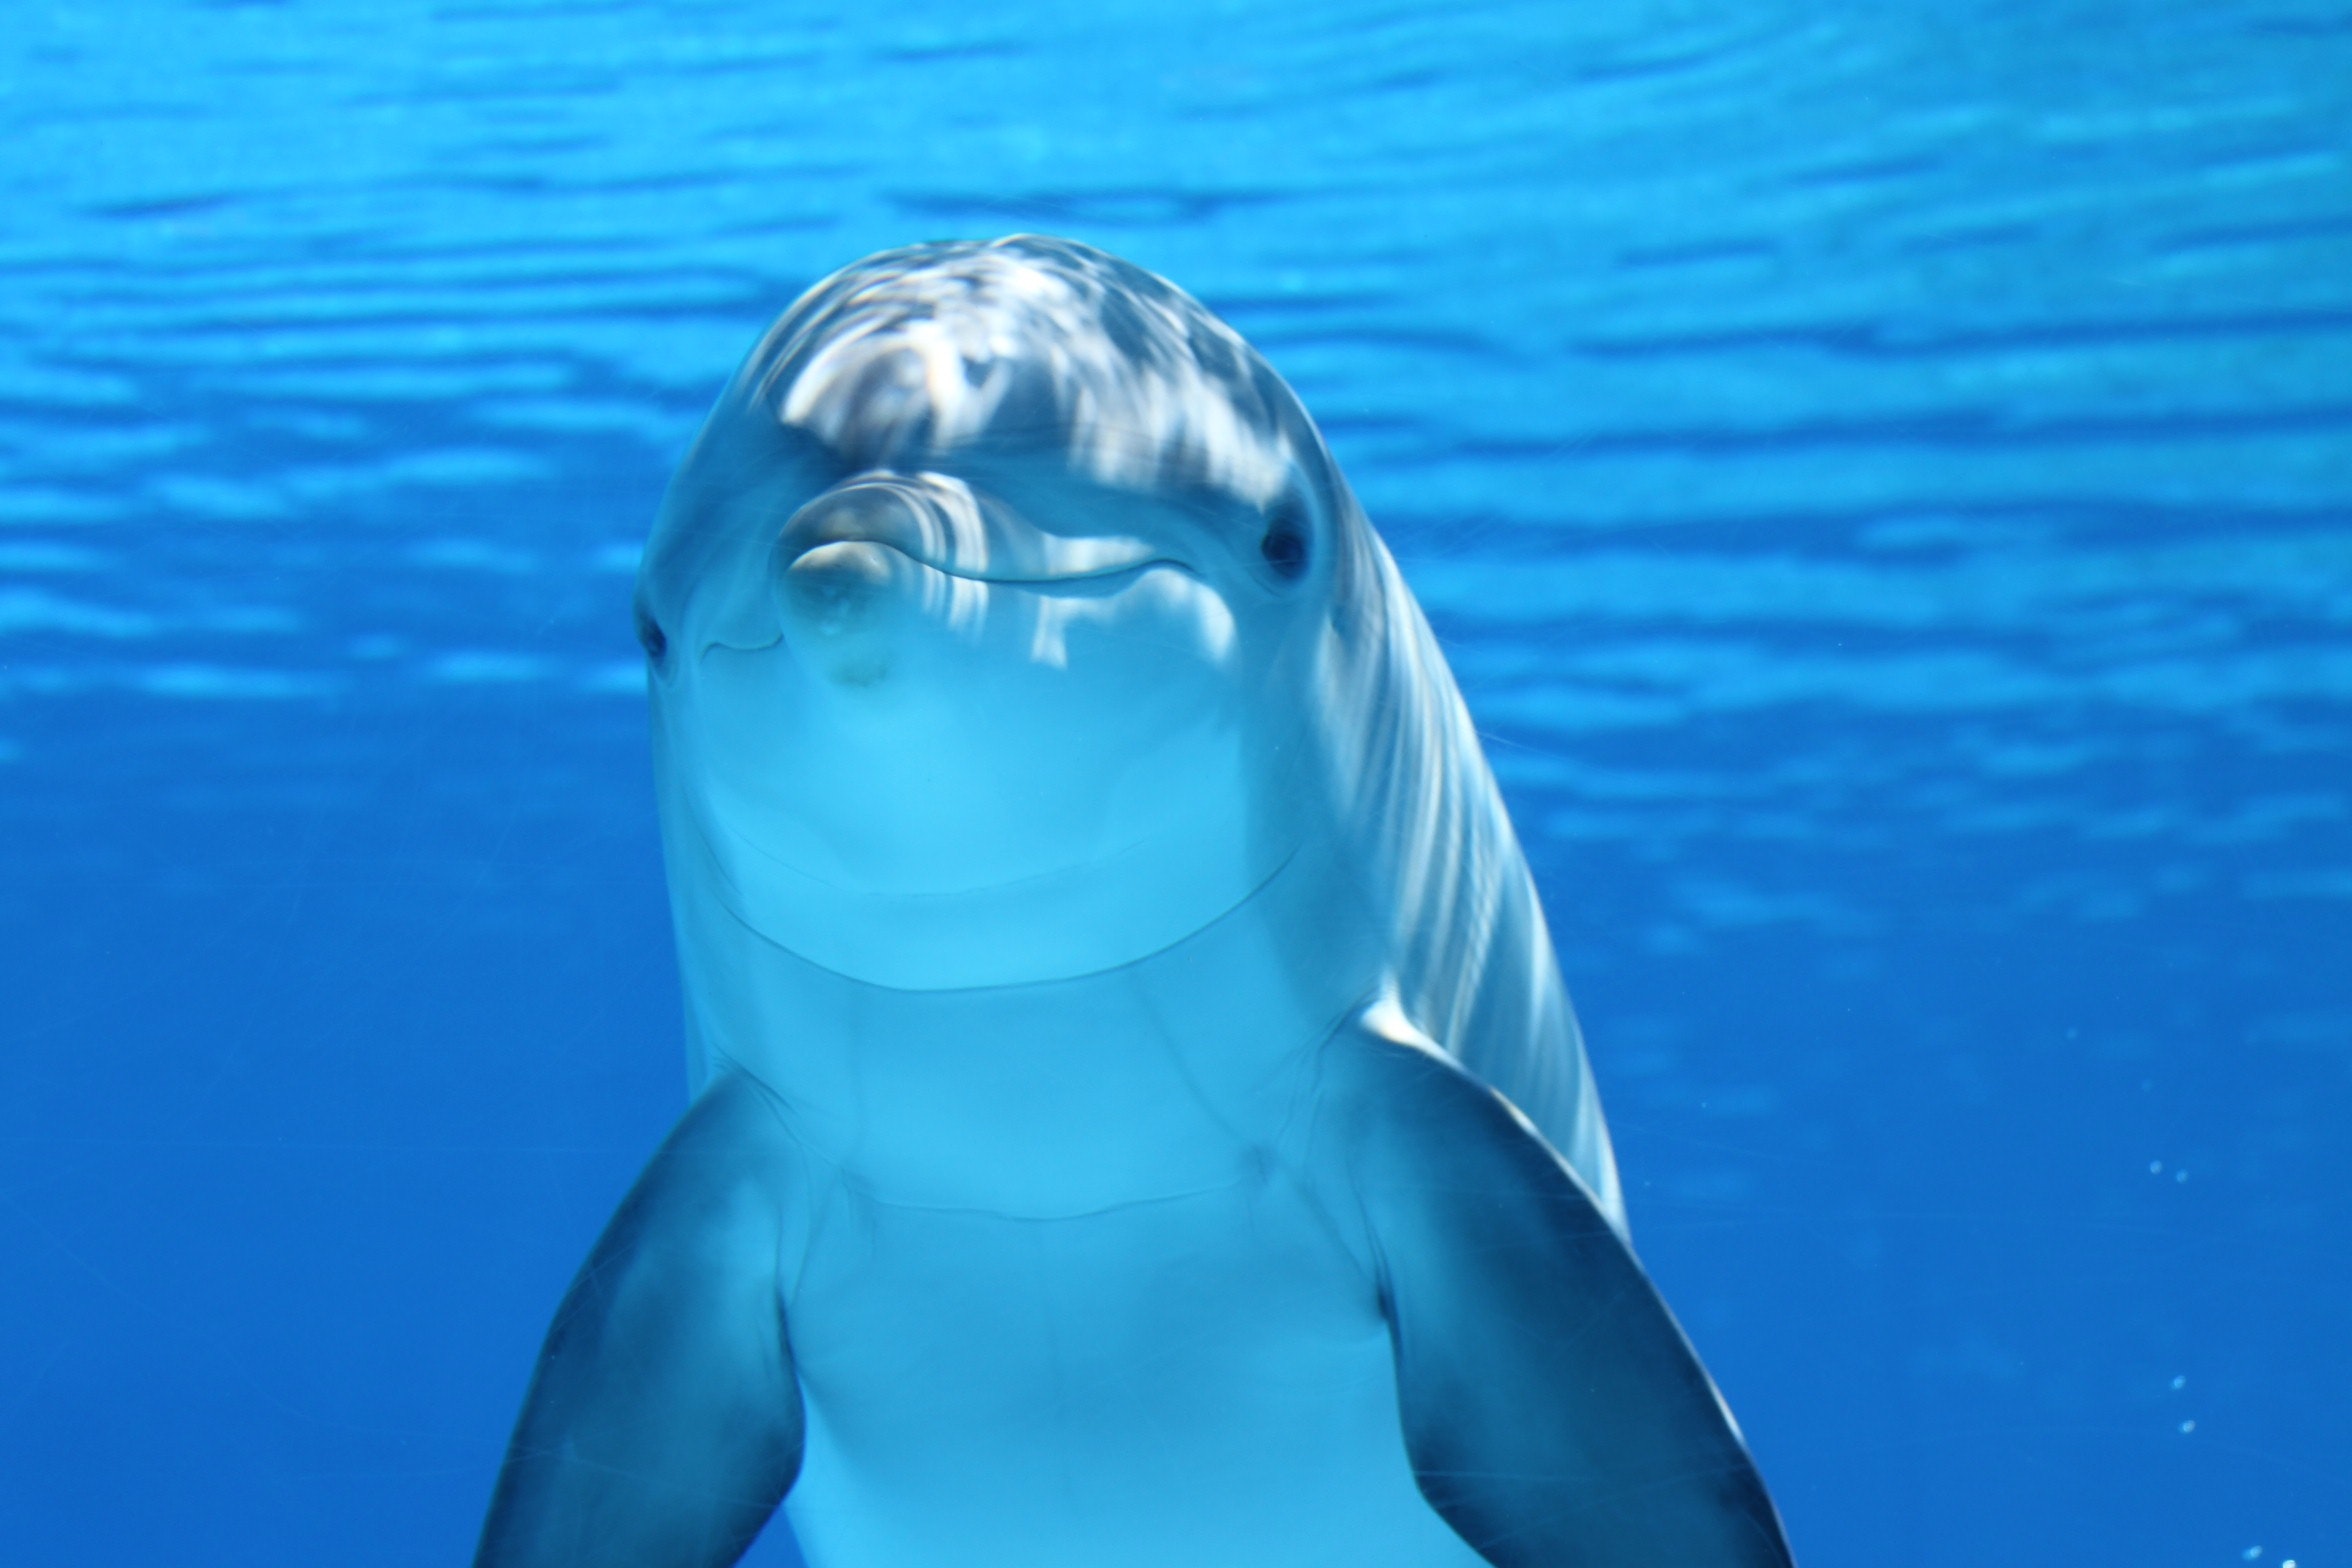 White and Gray Dolphin on Blue Water, Animal, Close-up, Cute, Dolphin, HQ Photo